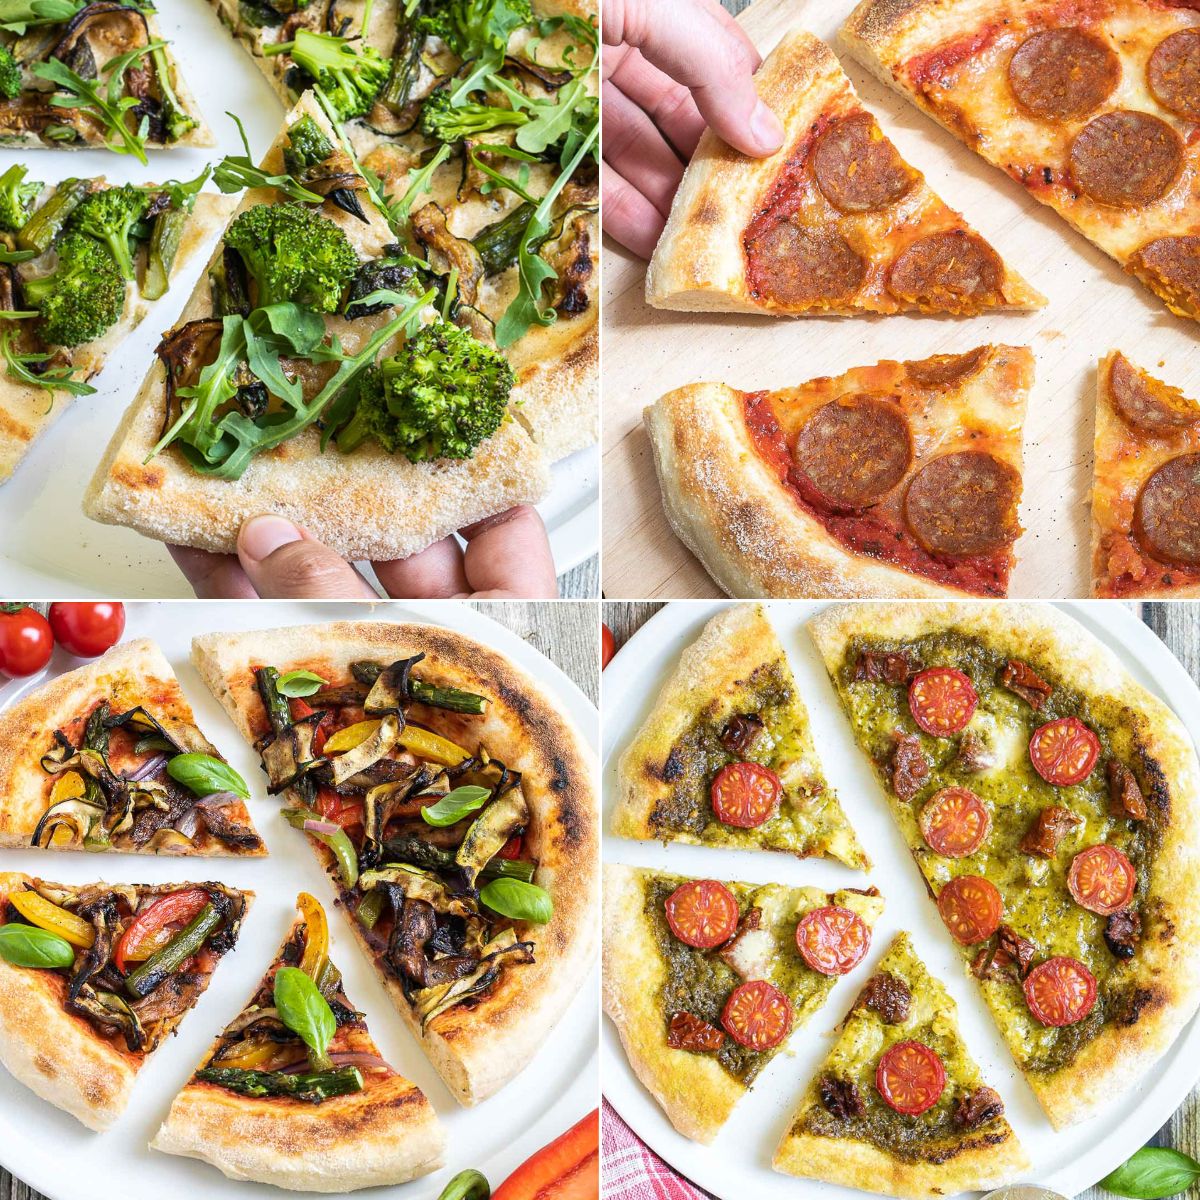 4 sliced pizzas with different toppings from green to pepperoni